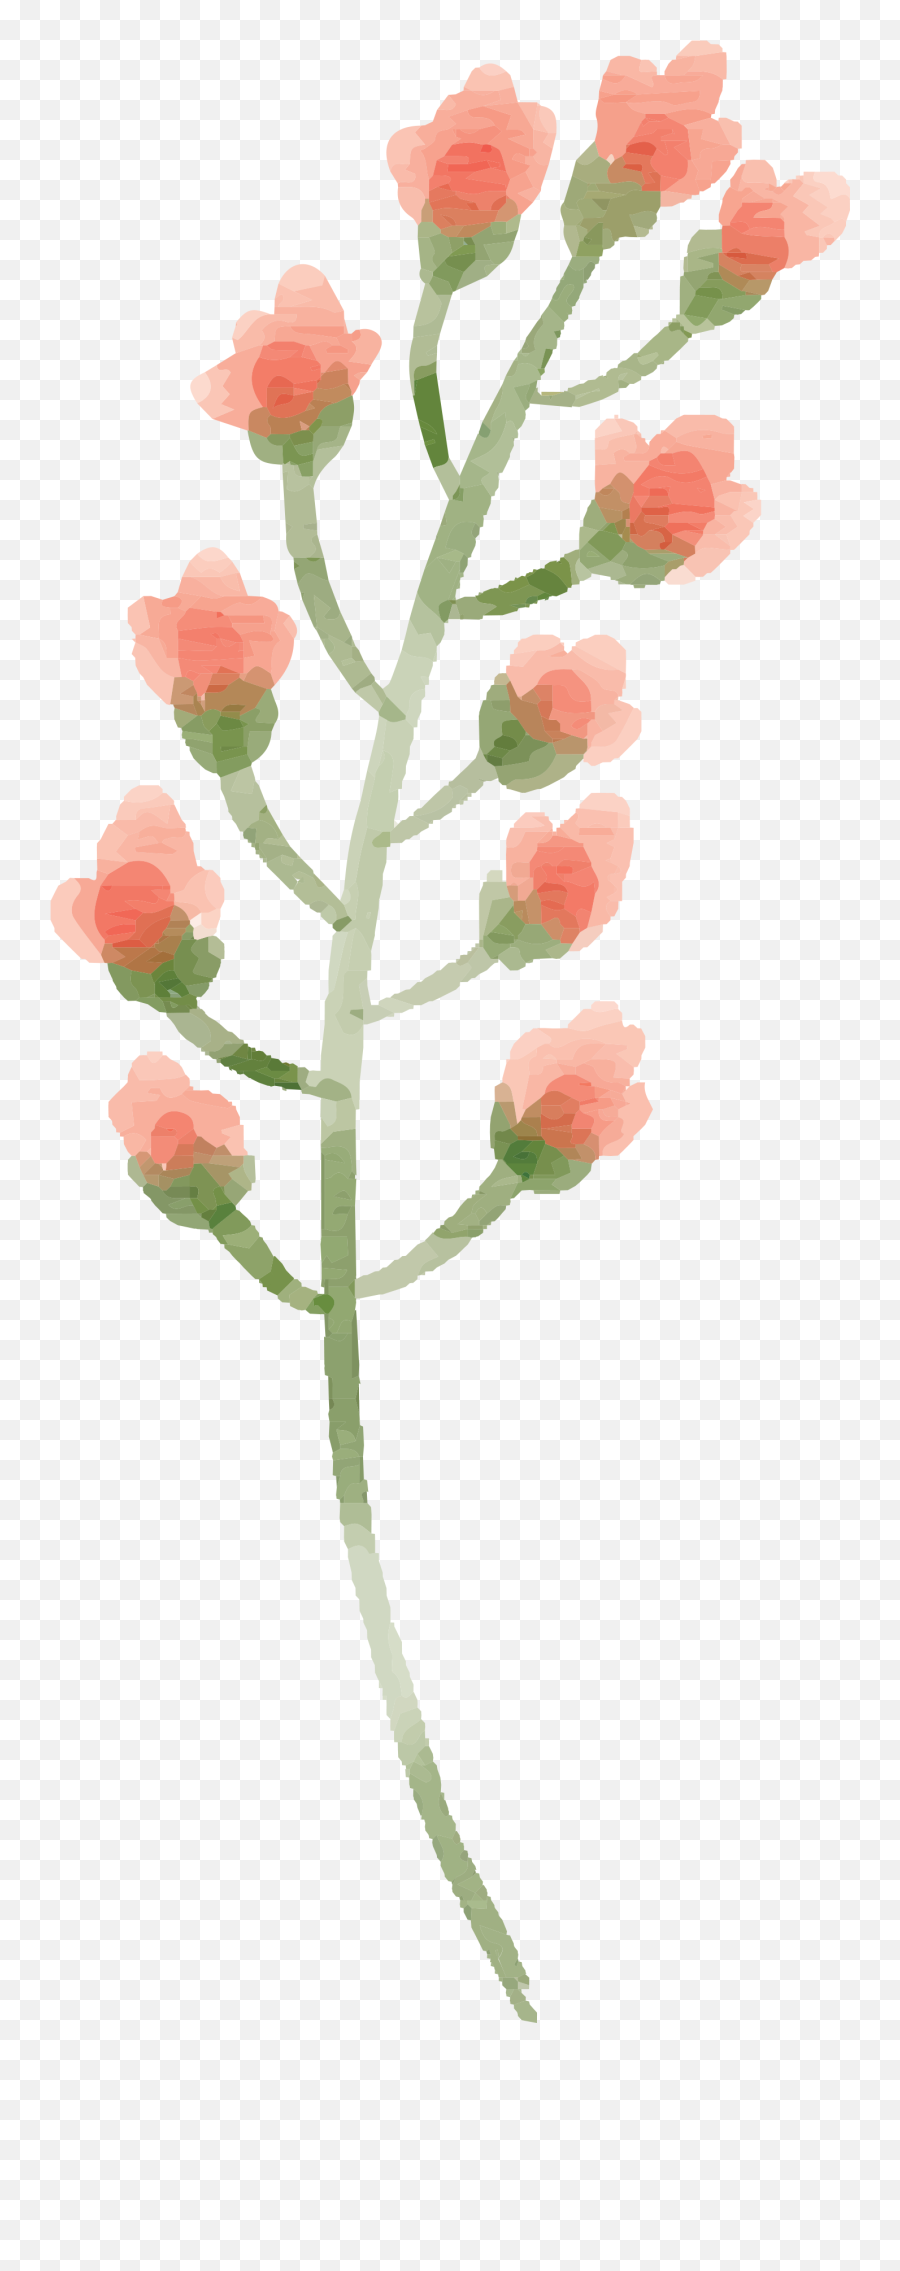 Free Watercolor Flower Images - Peach Delight Free Pretty Transparent Background Watercolor Peach Flowers Watercolor Png Emoji,Watercolor Flowers Png